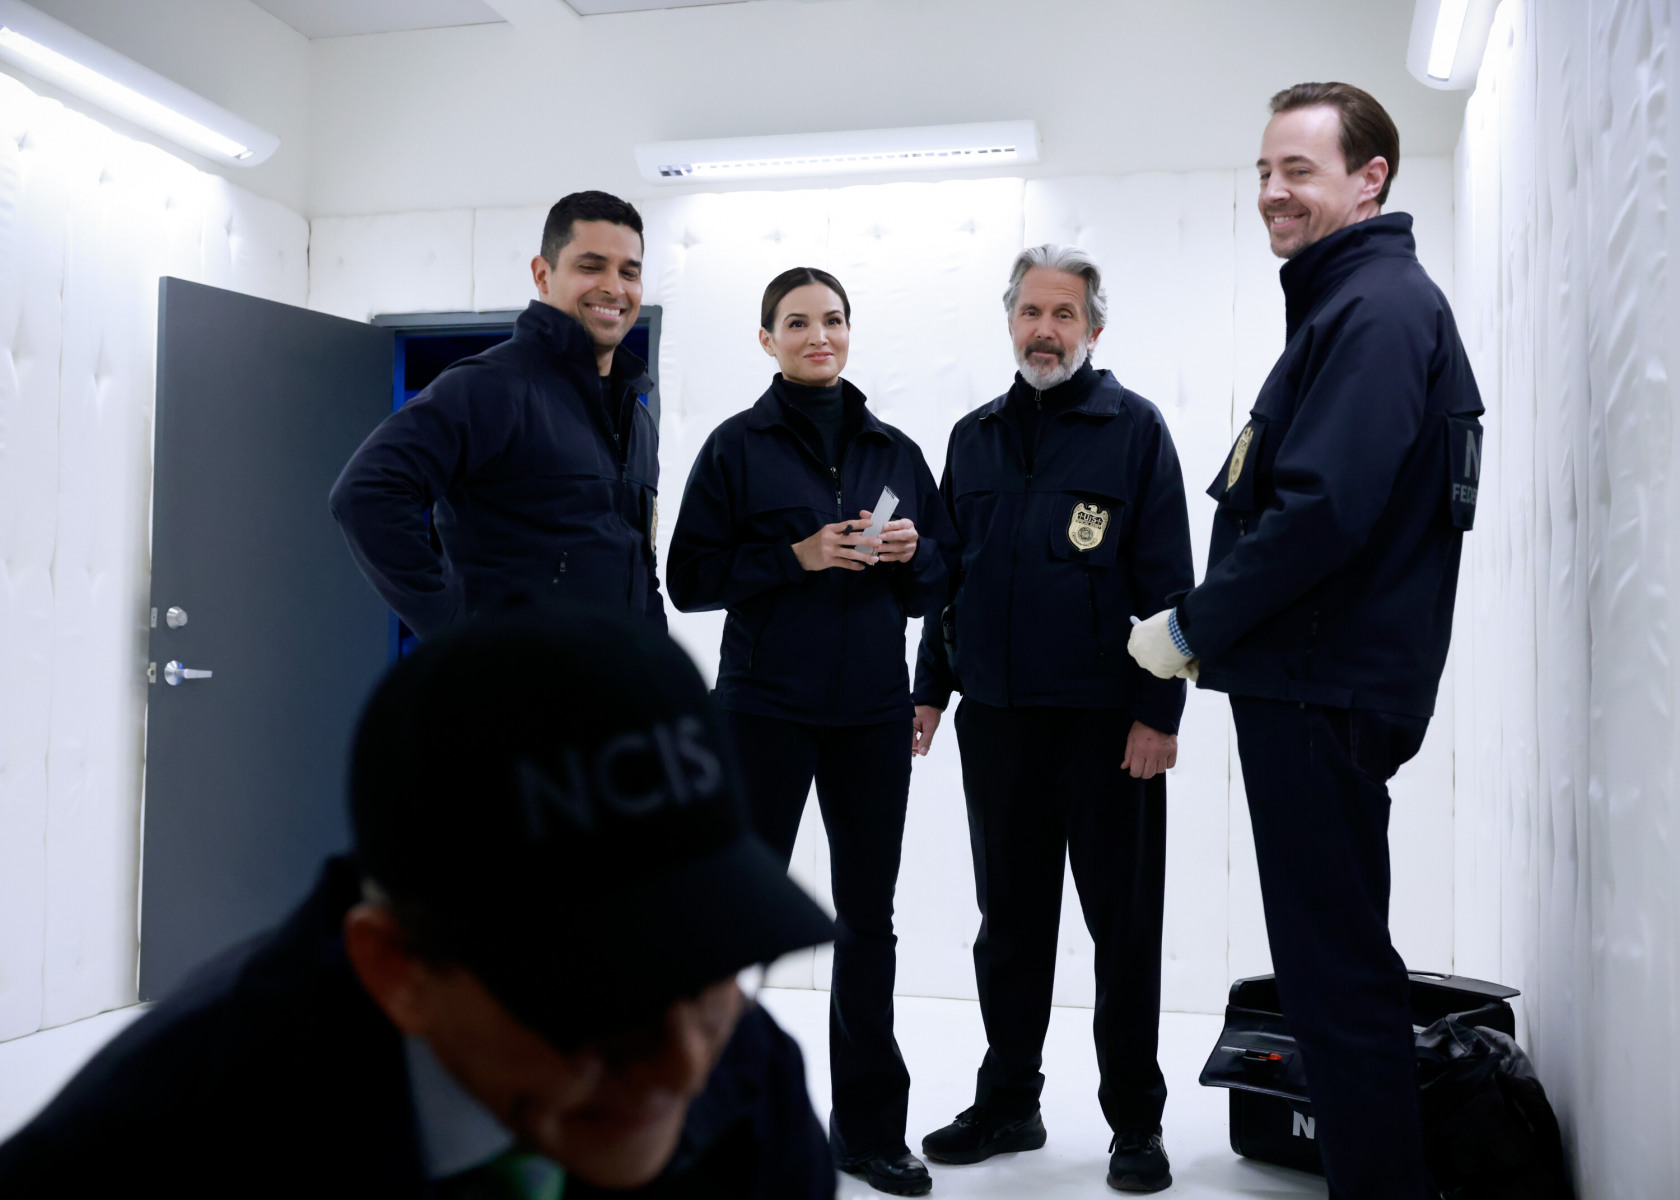 Brian Dietzen as Jimmy Palmer, Wilmer Valderrama as Nicholas “Nick” Torres, Katrina Law as Jessica Knight, Gary Cole as Alden Parker, and Sean Murray as Timothy McGee.